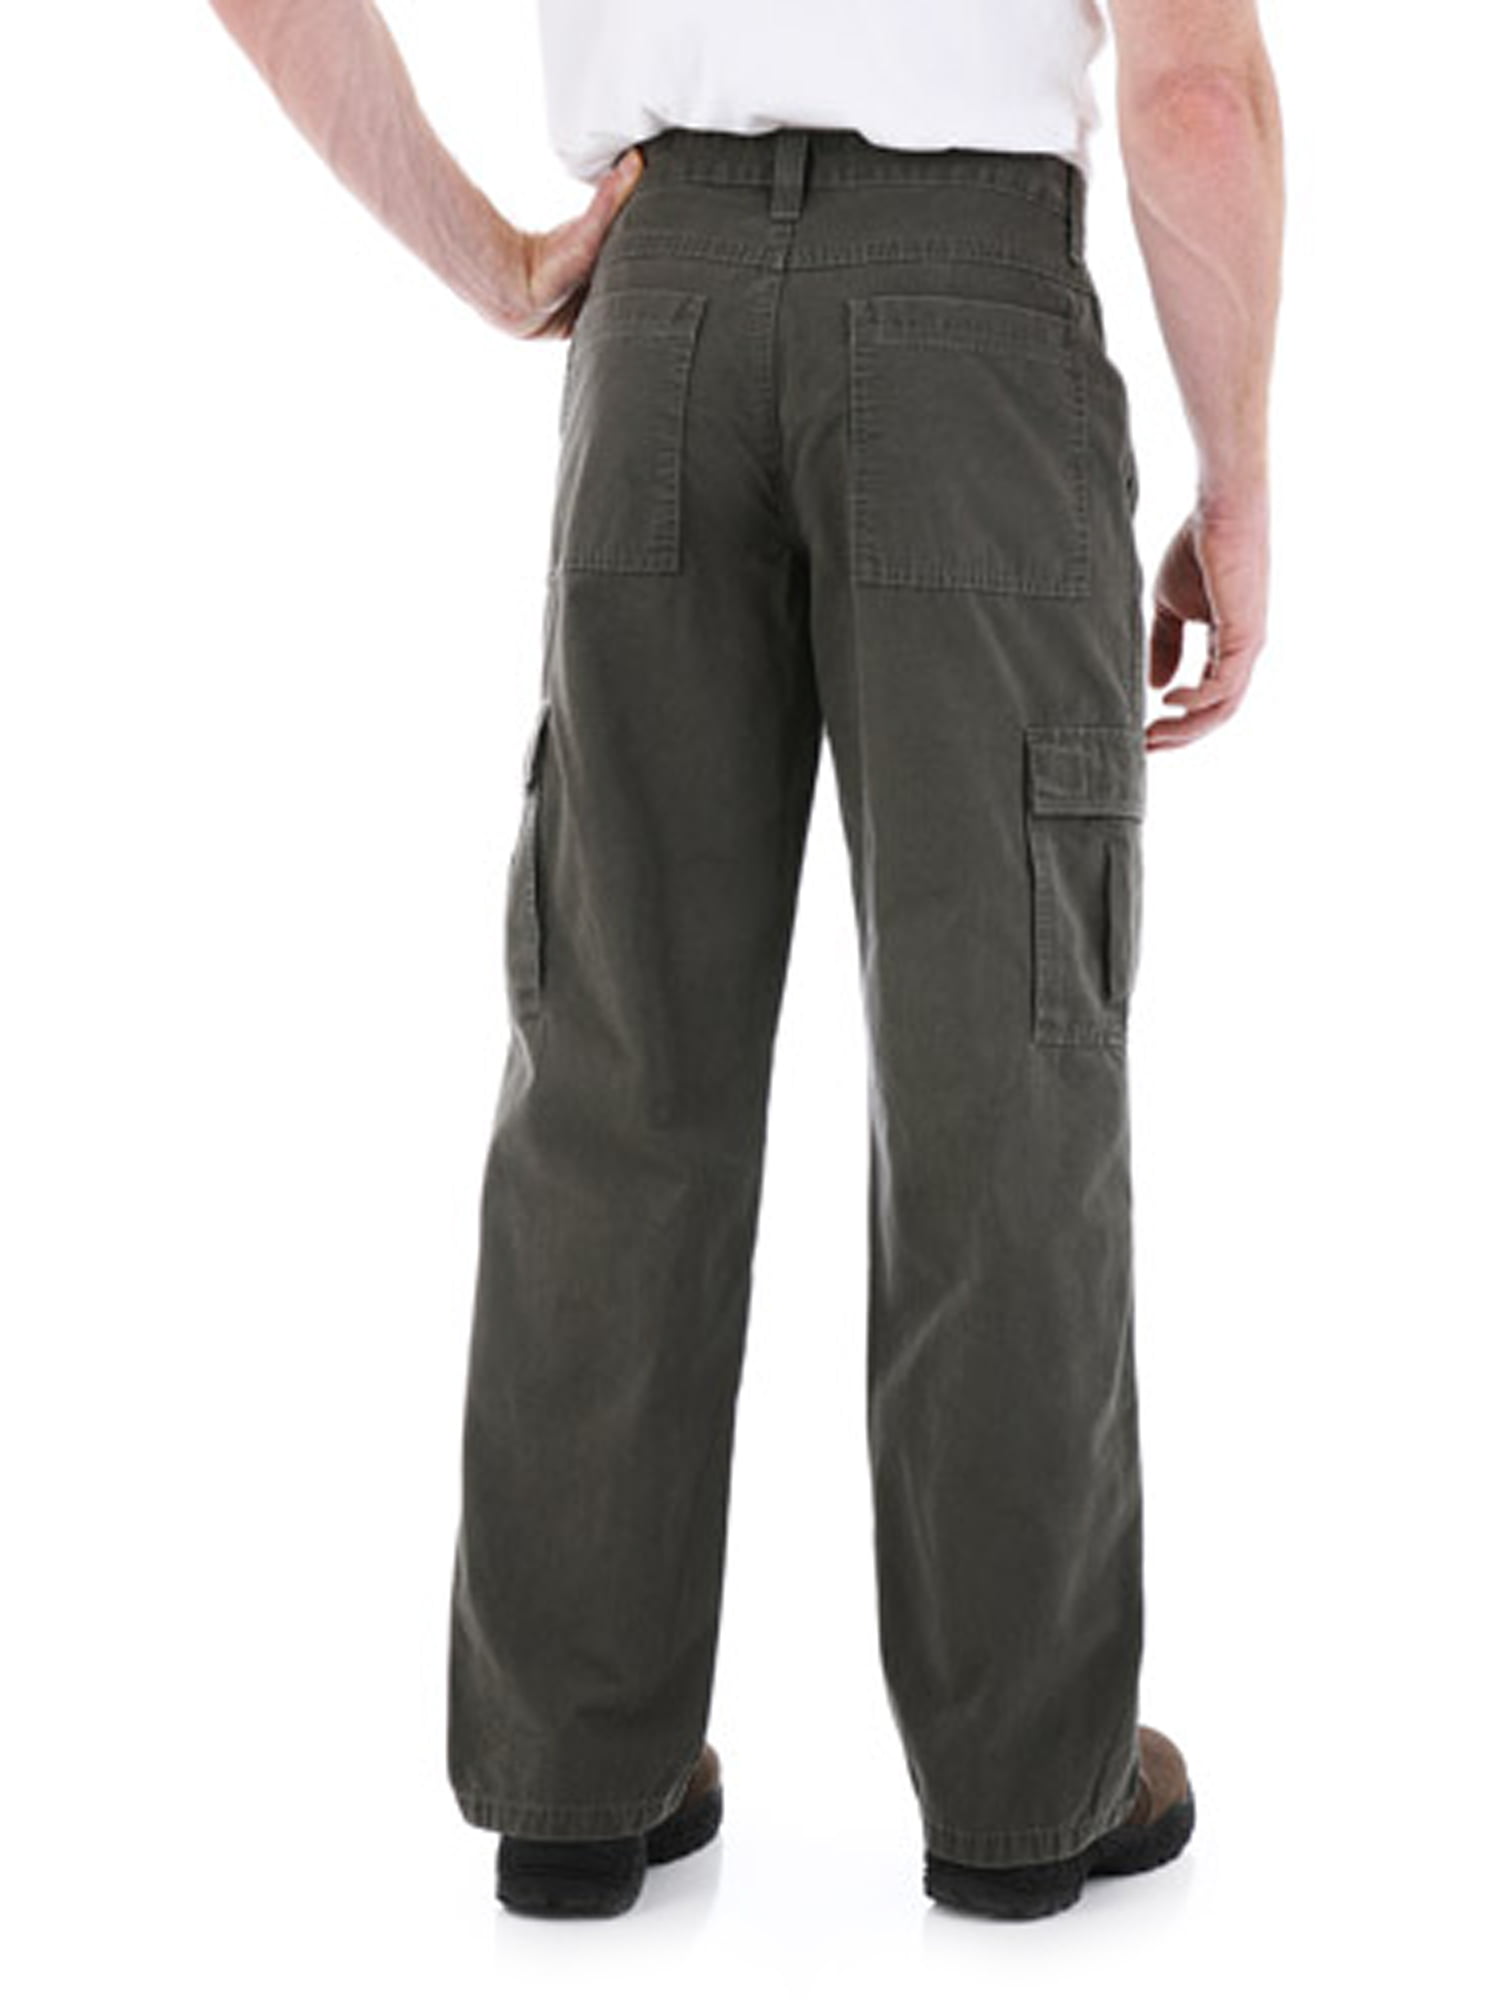 wrangler ripstop cargo pants relaxed fit